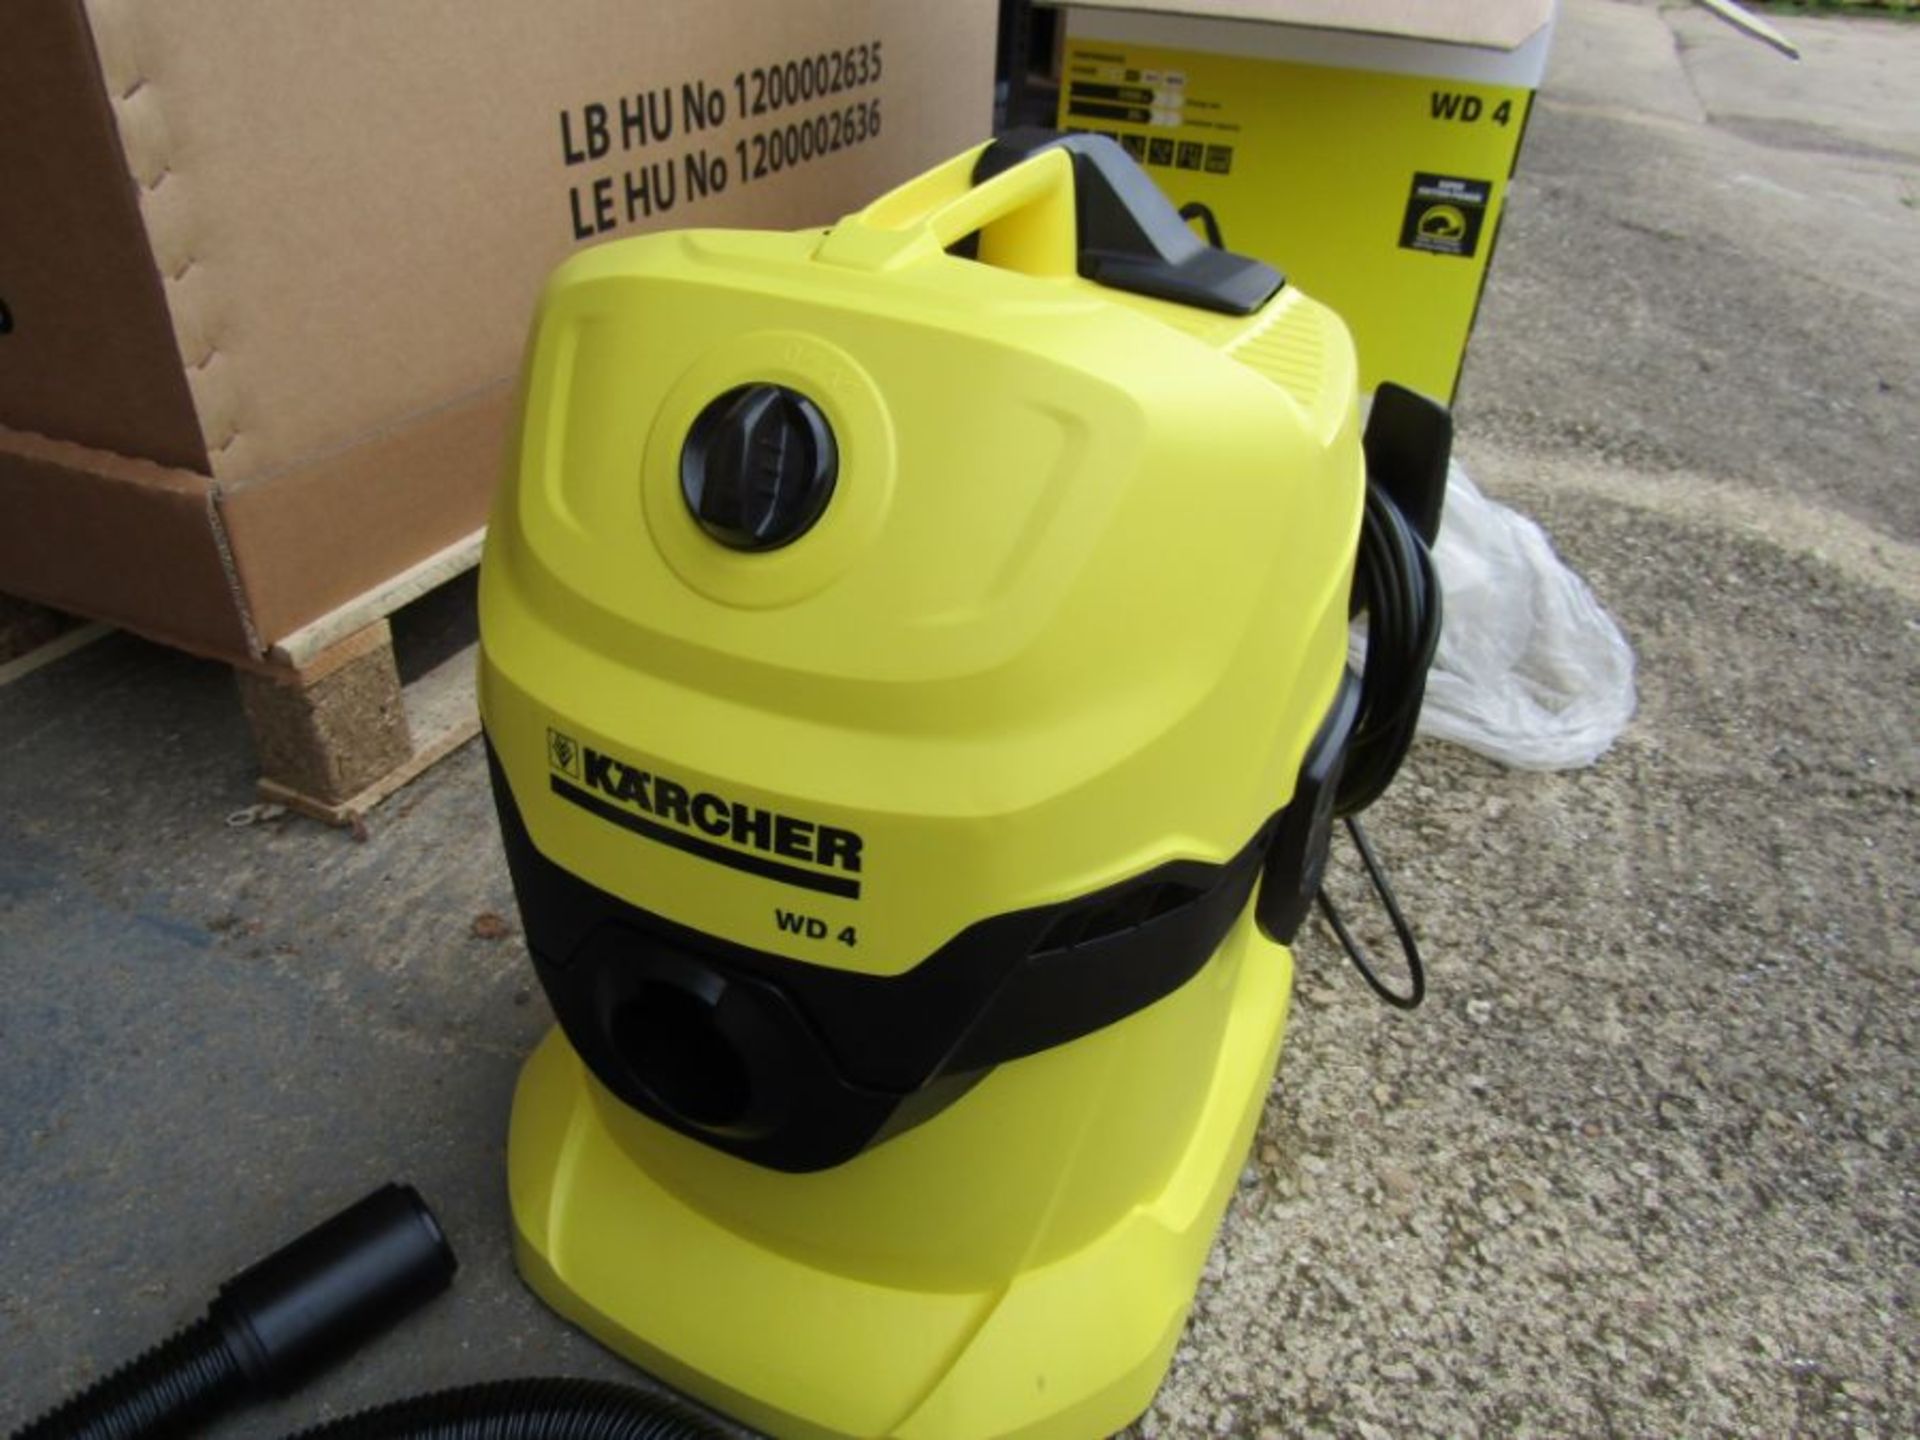 Karcher WD 4 Wet and Dry Vacuum Cleaner - Yellow - UK Plug Blk 1931654